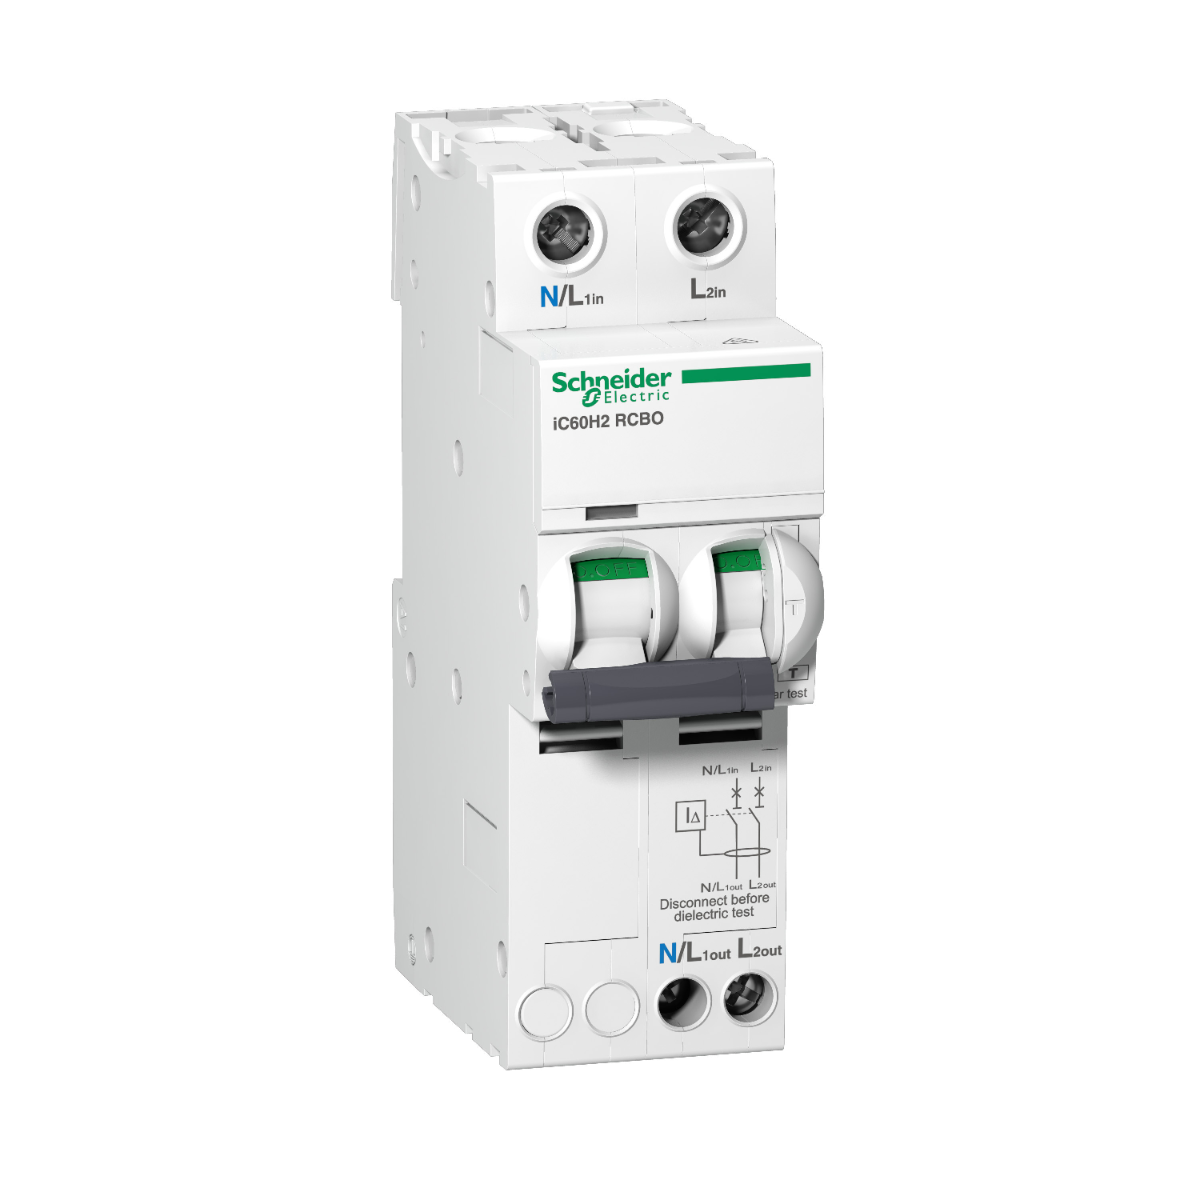 Residual current breaker with overcurrent protection (RCBO), Acti9 iC60H2 RCBO, 2P, 32A, 30mA, A type, 10000A, White